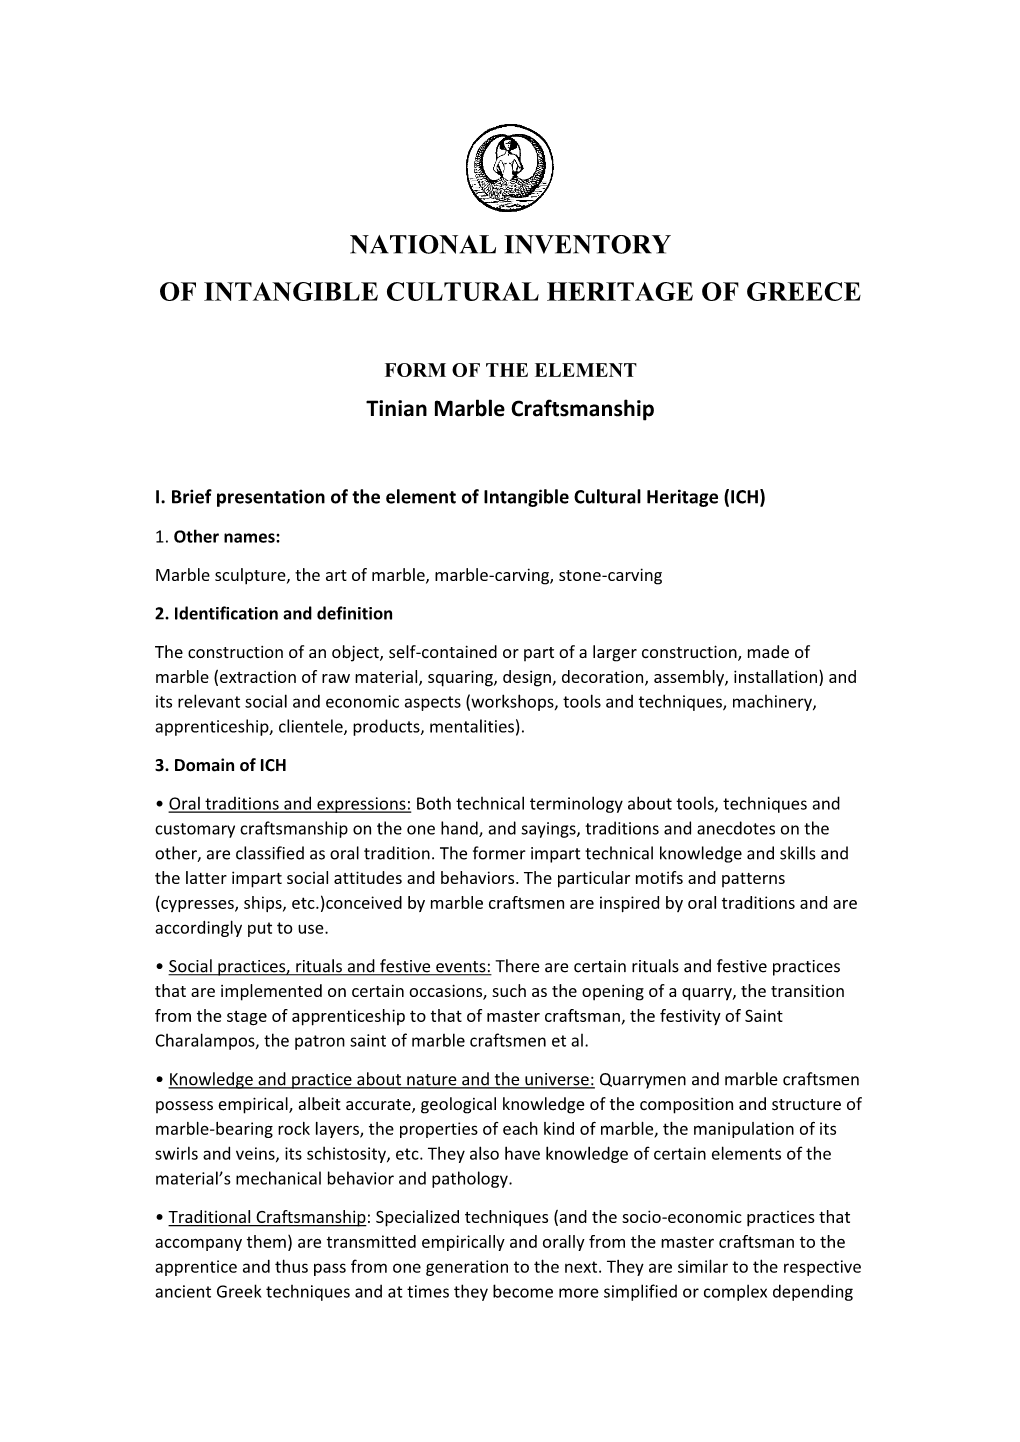 National Inventory of Intangible Cultural Heritage of Greece